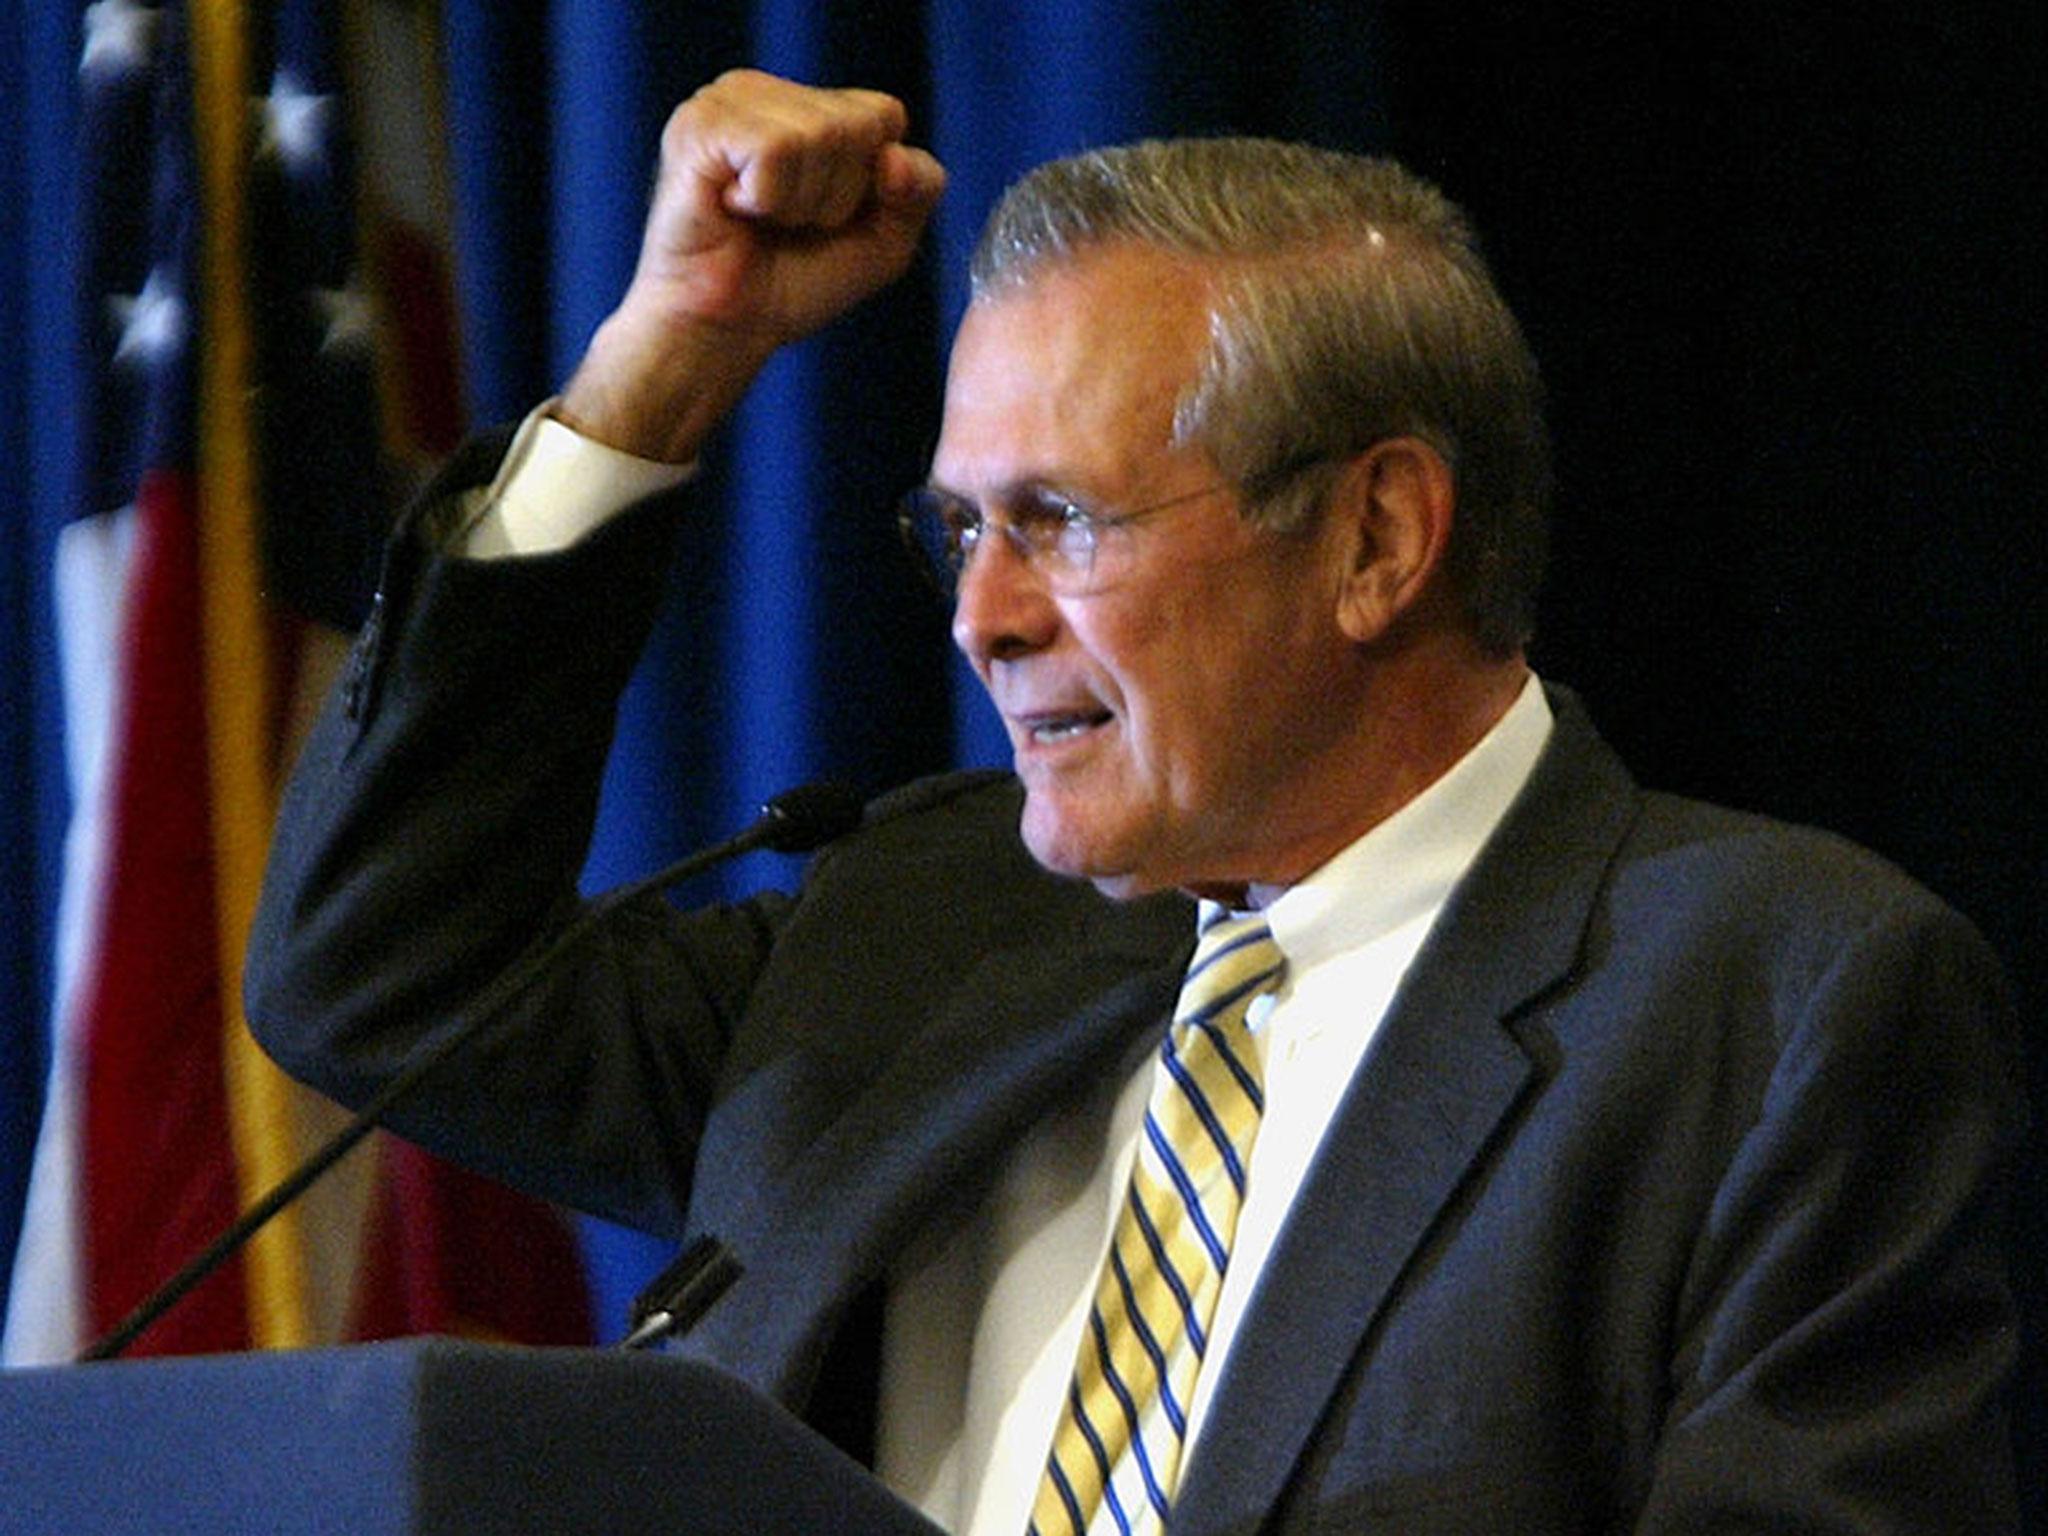 October 2003: Donald Rumsfeld gives a lecture about directing the response to the 9/11 attacks